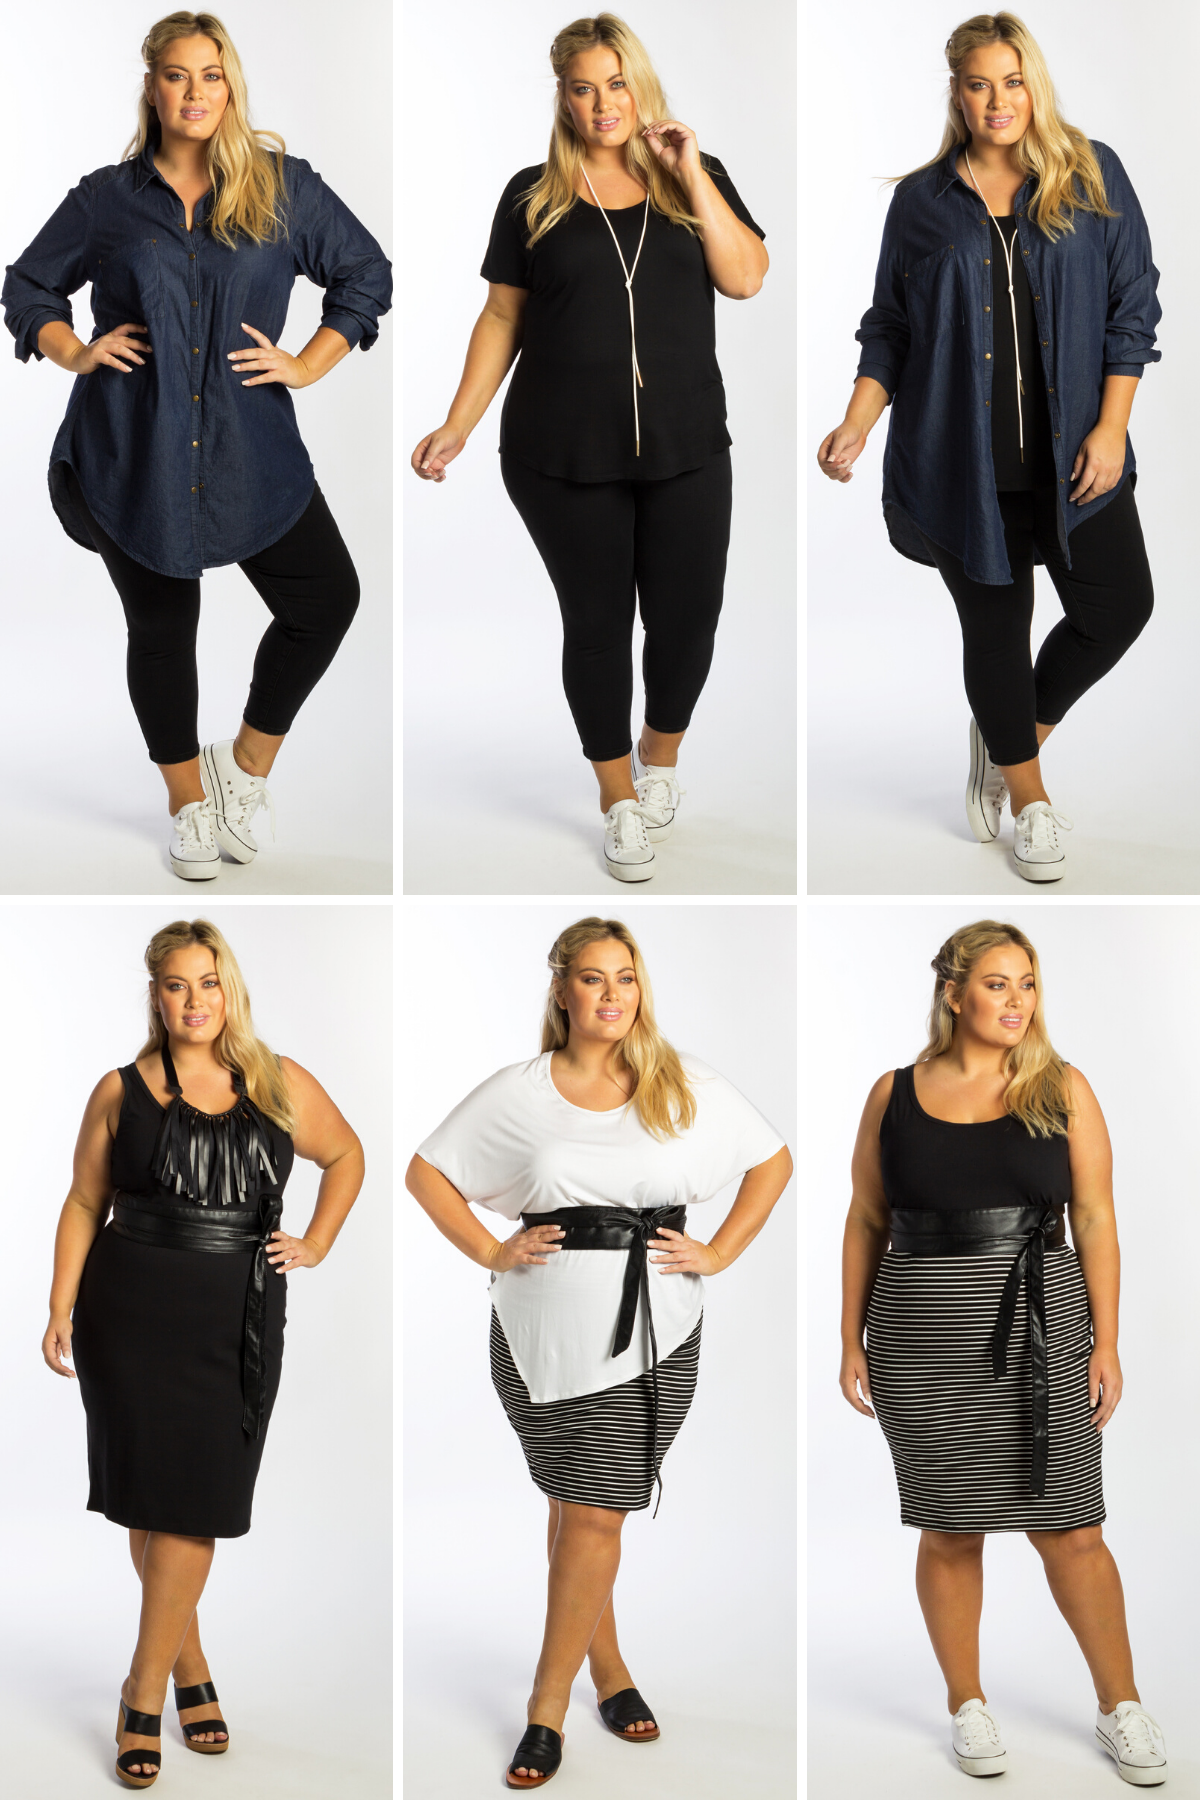 Capsule Collection - 7 pieces + 4 Accessories = 21 outfits – Harlow